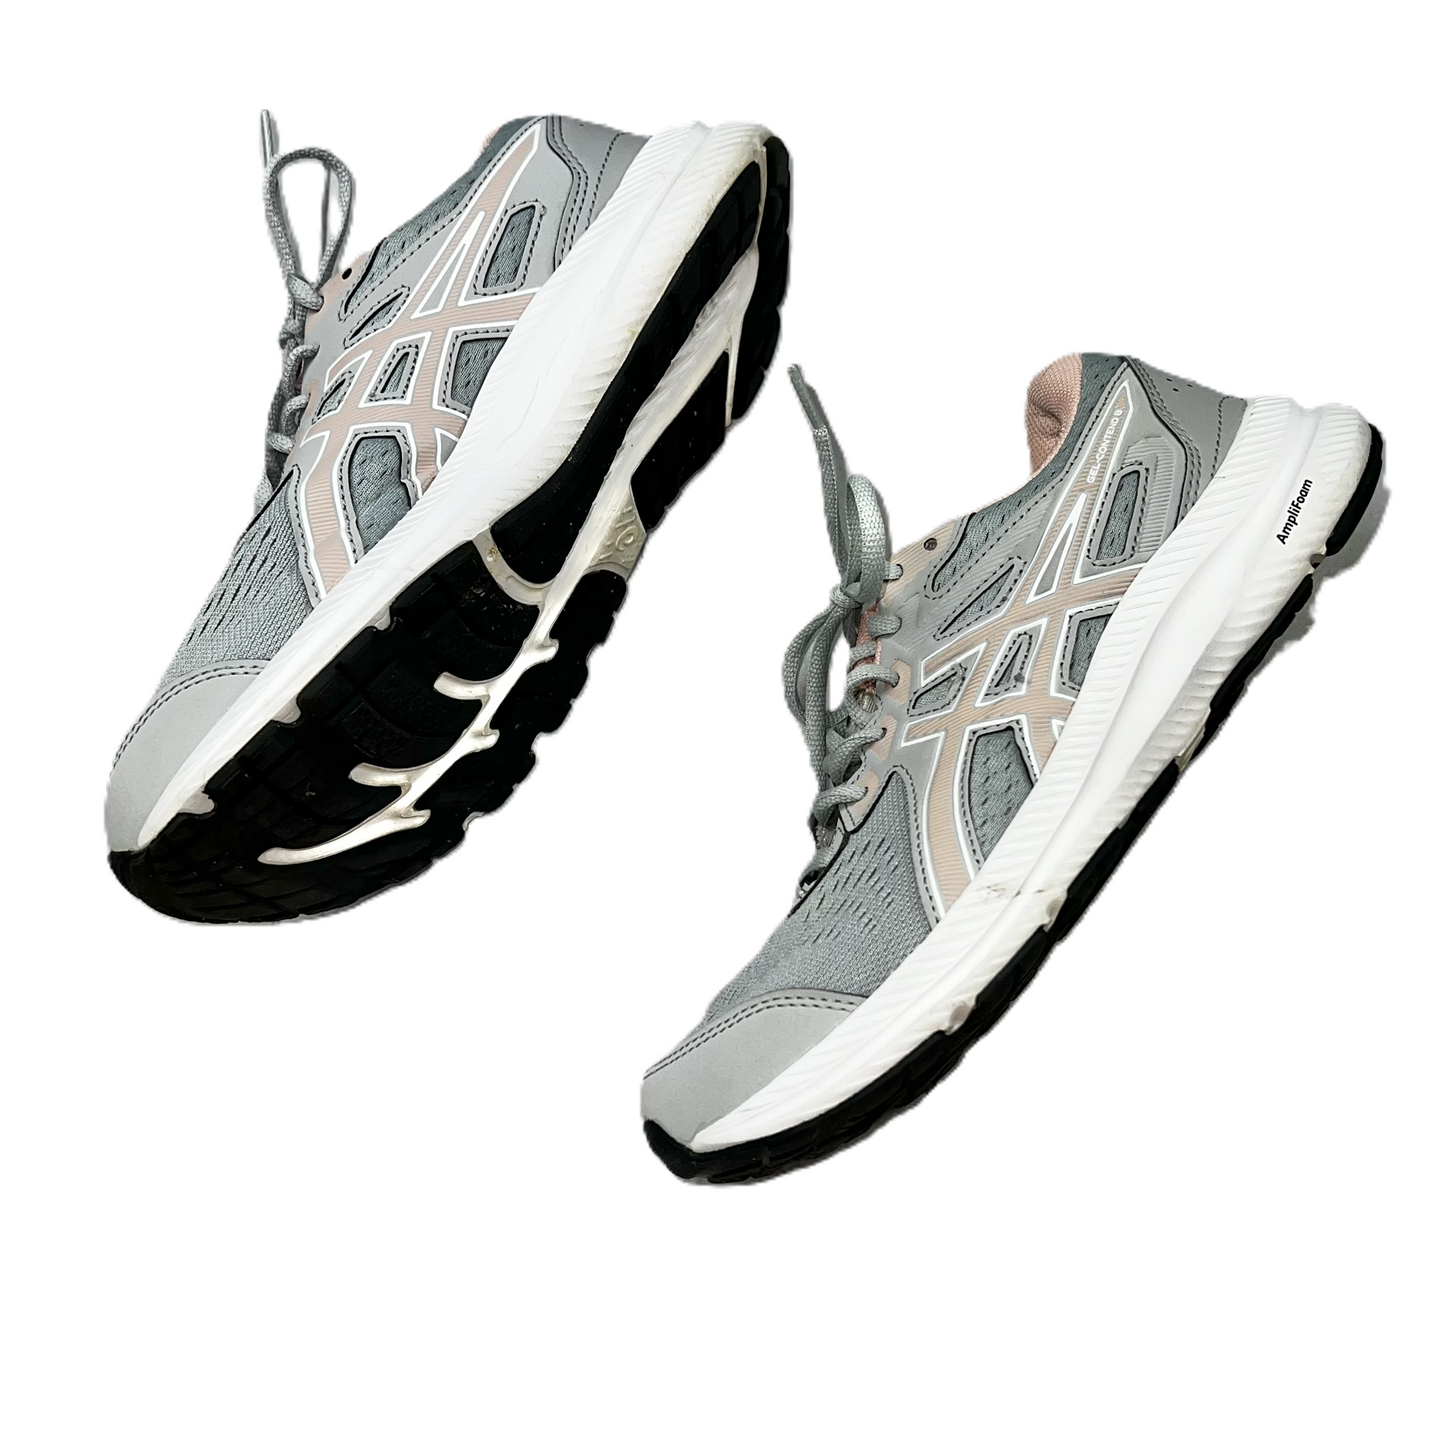 Grey & Pink Shoes Athletic By Asics, Size: 8.5